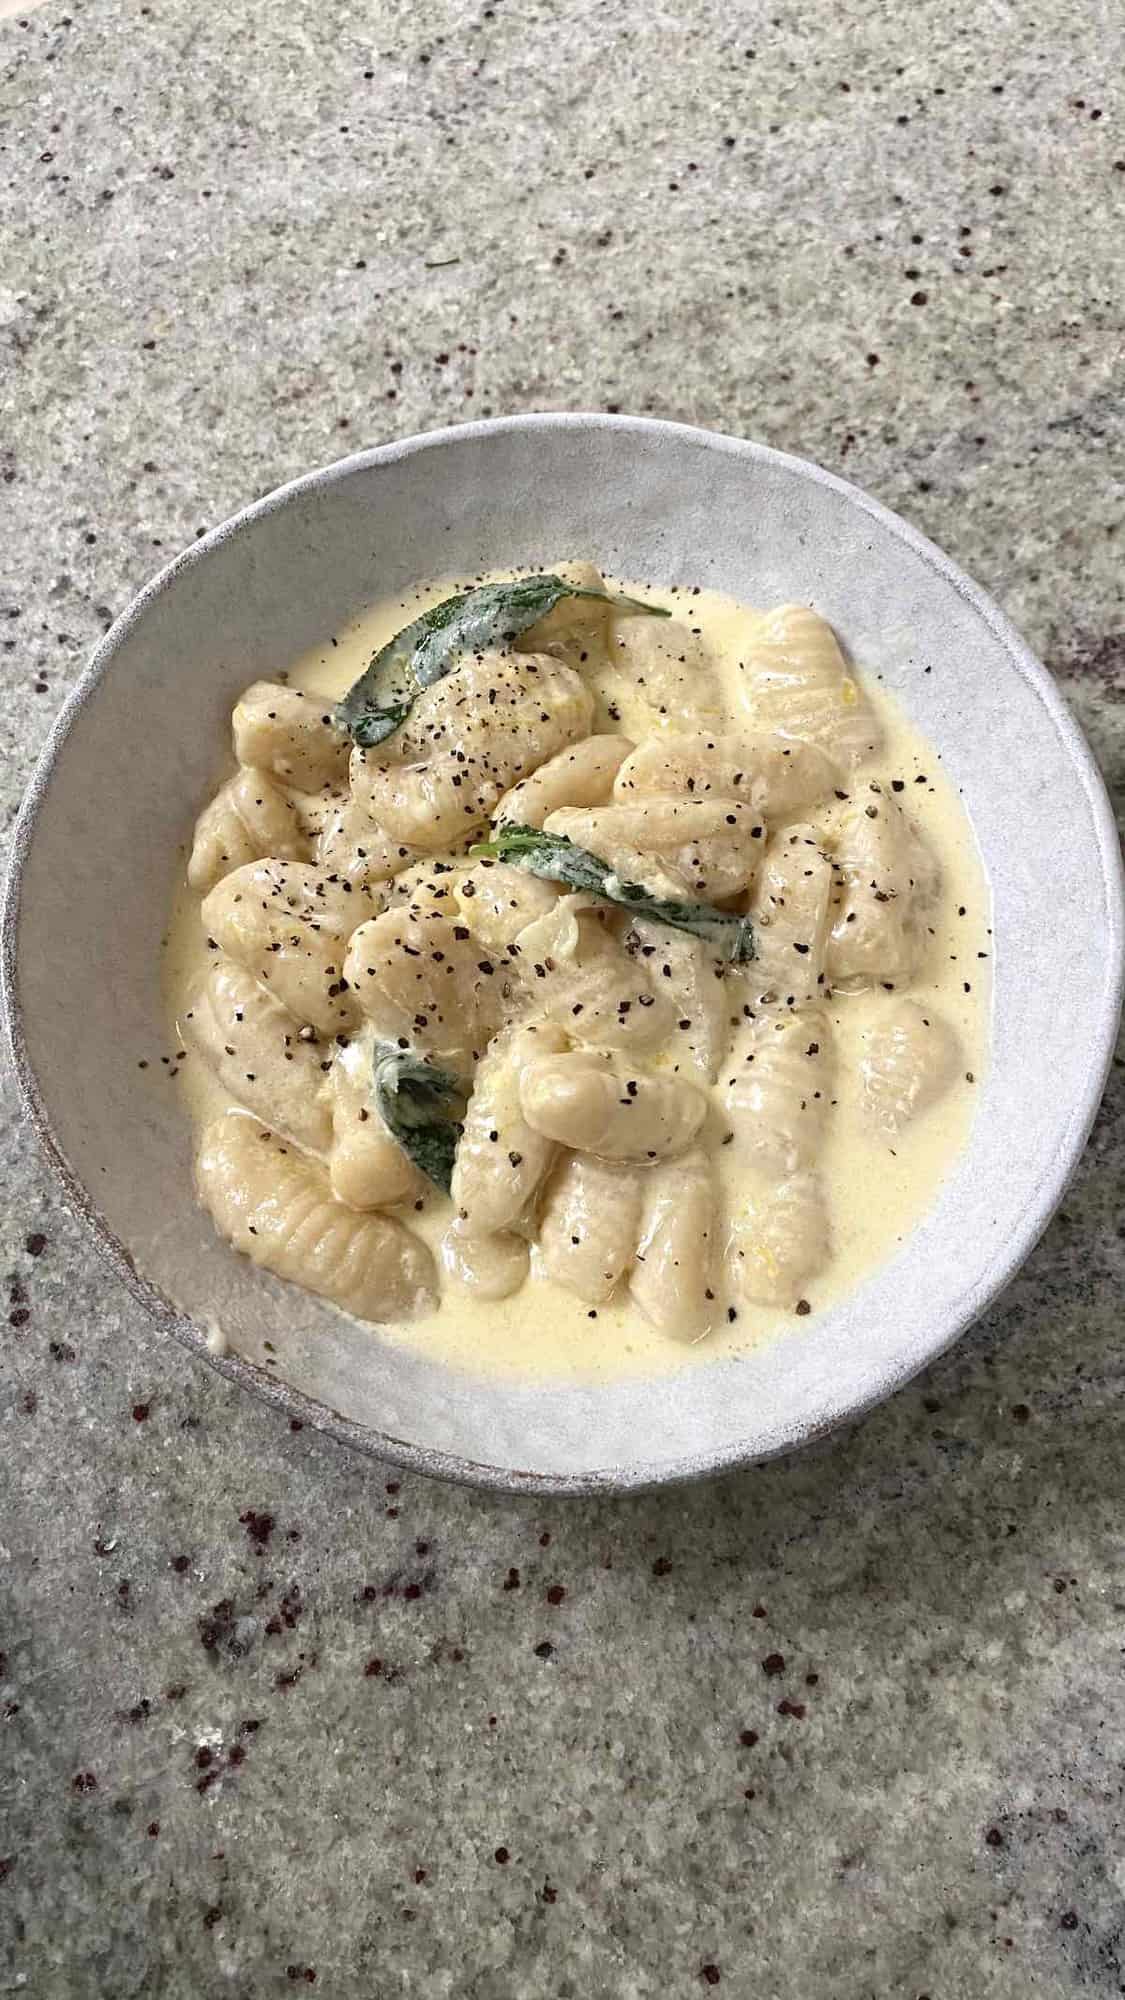 Gnocchi served with sauce